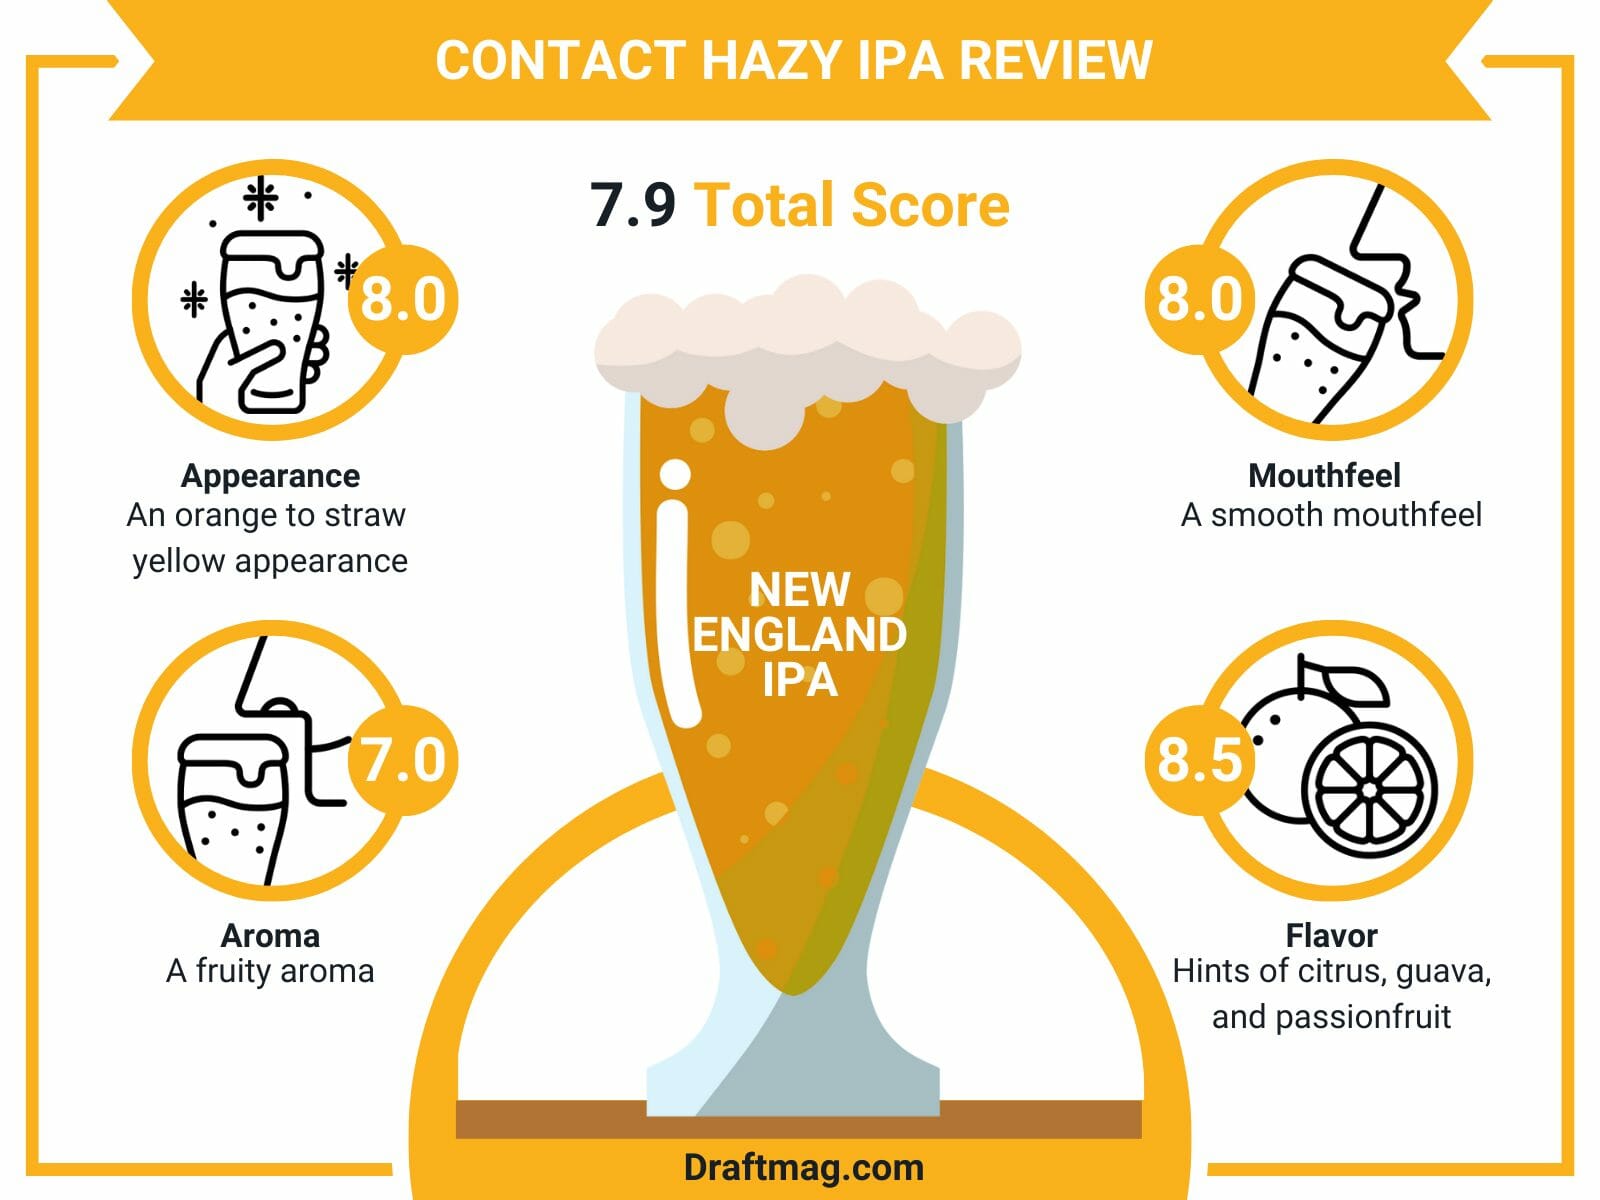 Contact hazy ipa review infographic